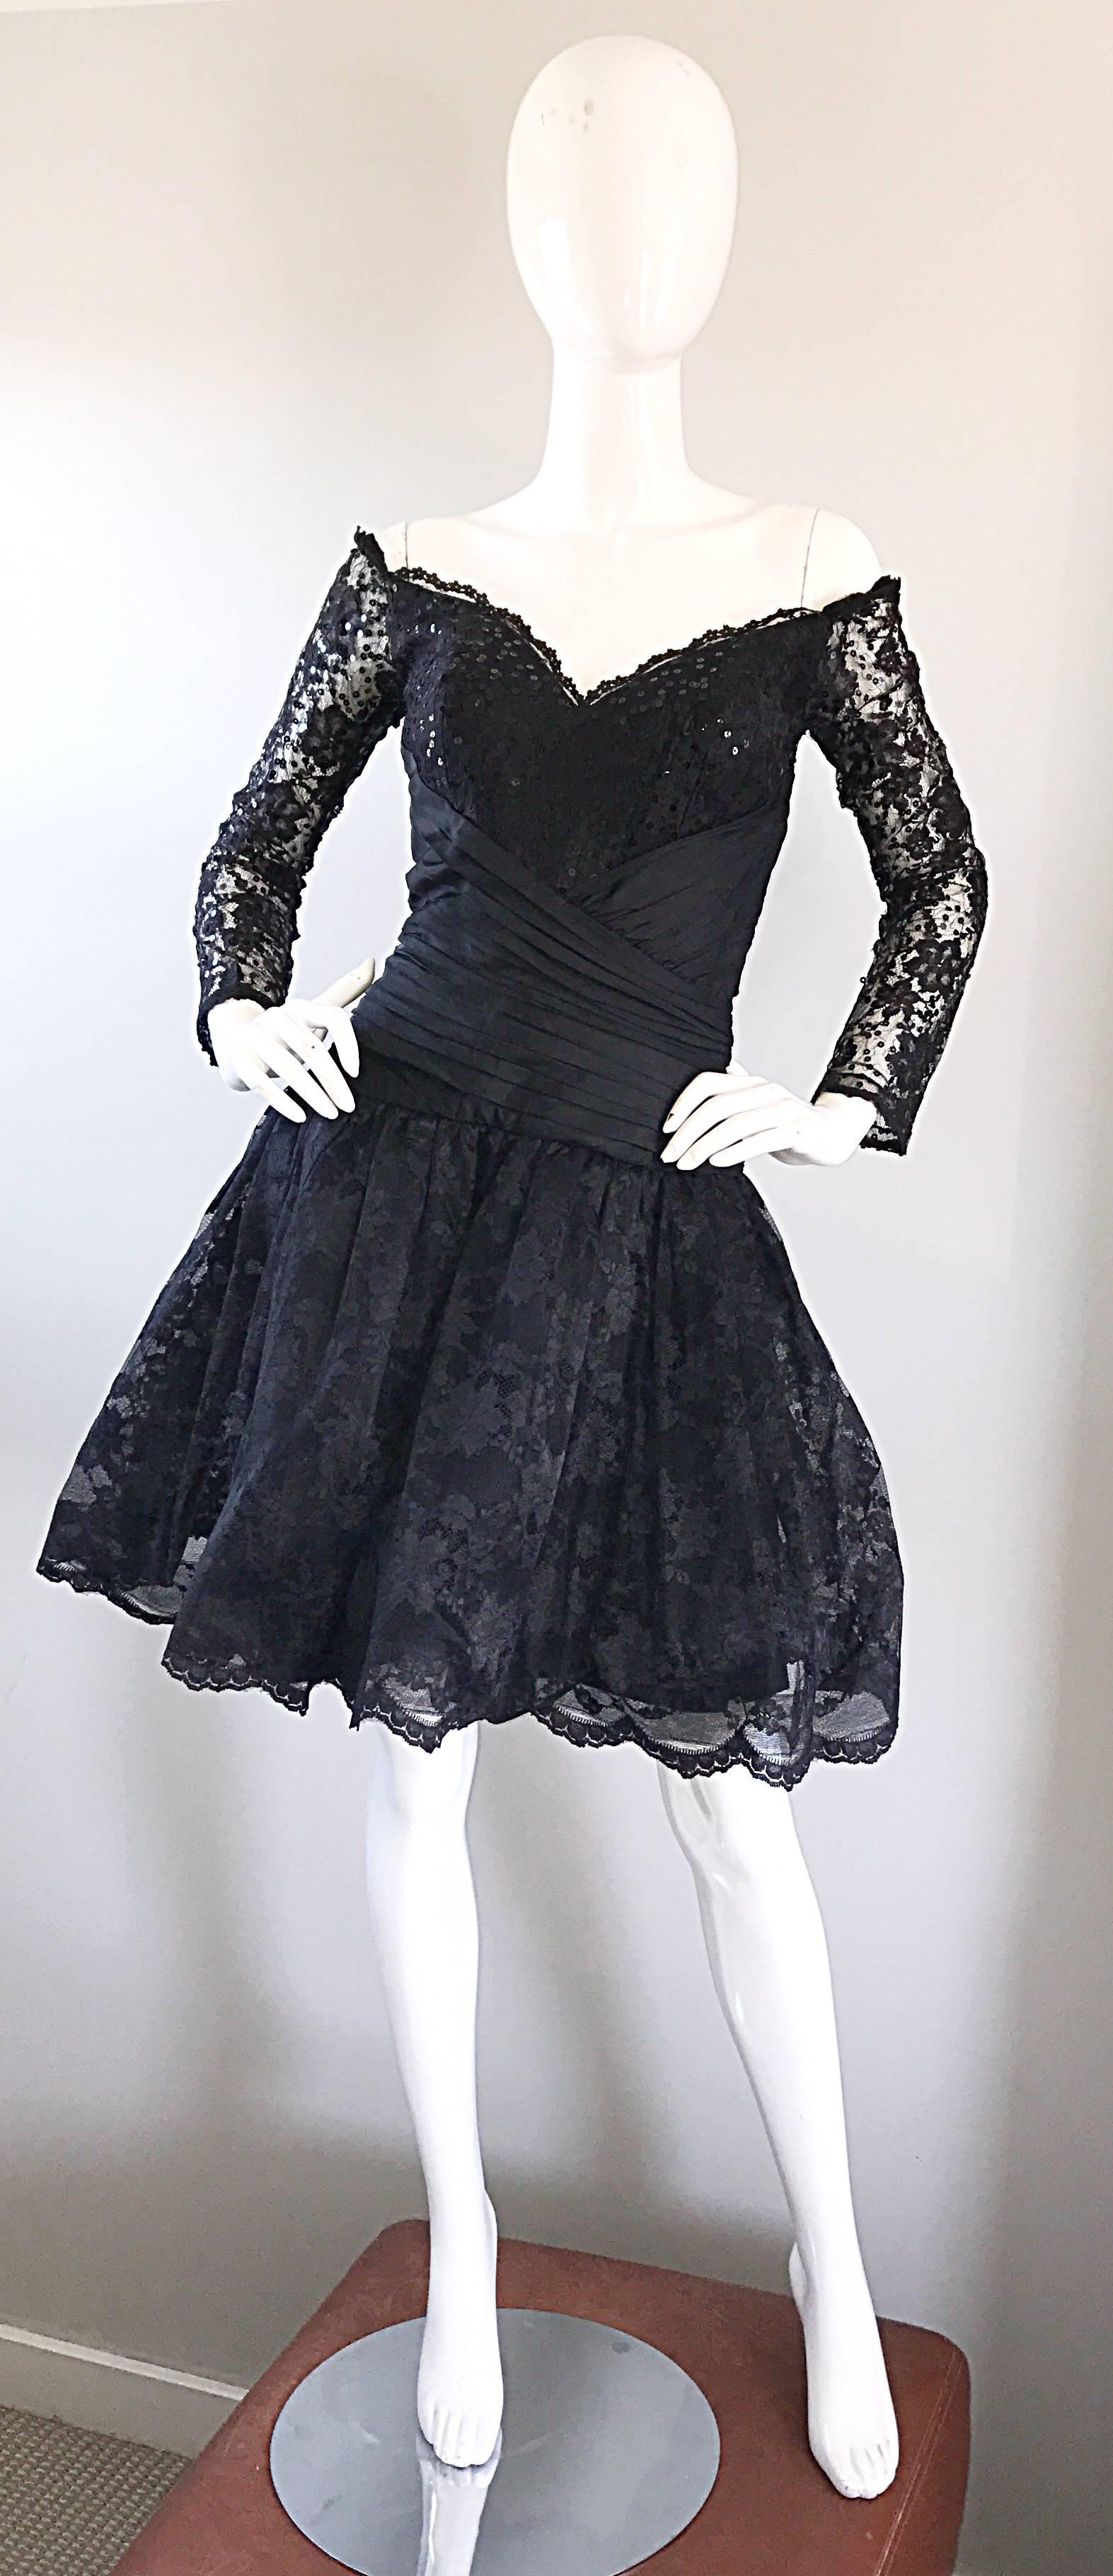 Gorgeous vintage 1980s TADASHI SHOJI black taffeta off-the-shoulder cocktail dress! Features hundreds of hand-sewn black sequins throughout the bodice and sleeves. Taffeta pleated waistband, w/ an amazing full 'pouf' skirt! Sleek tailored long